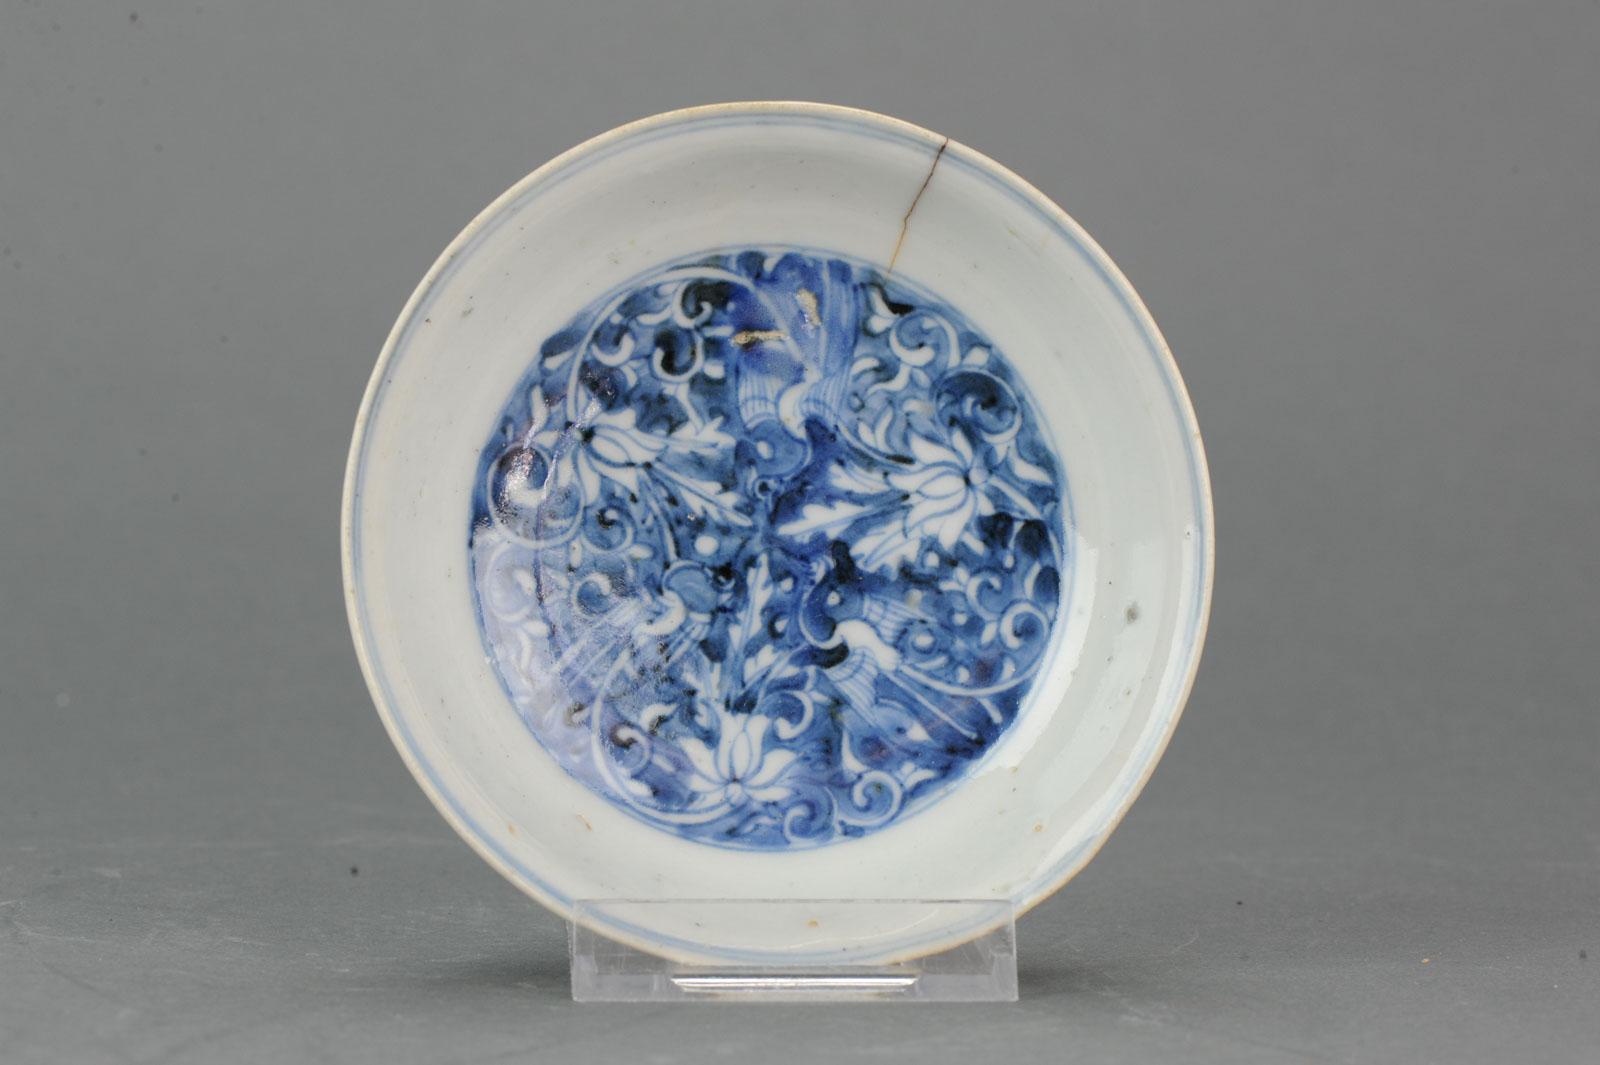 Antique Chinese 17th Century Porcelain Ming Jiajing Marked and Period Plate For Sale 5